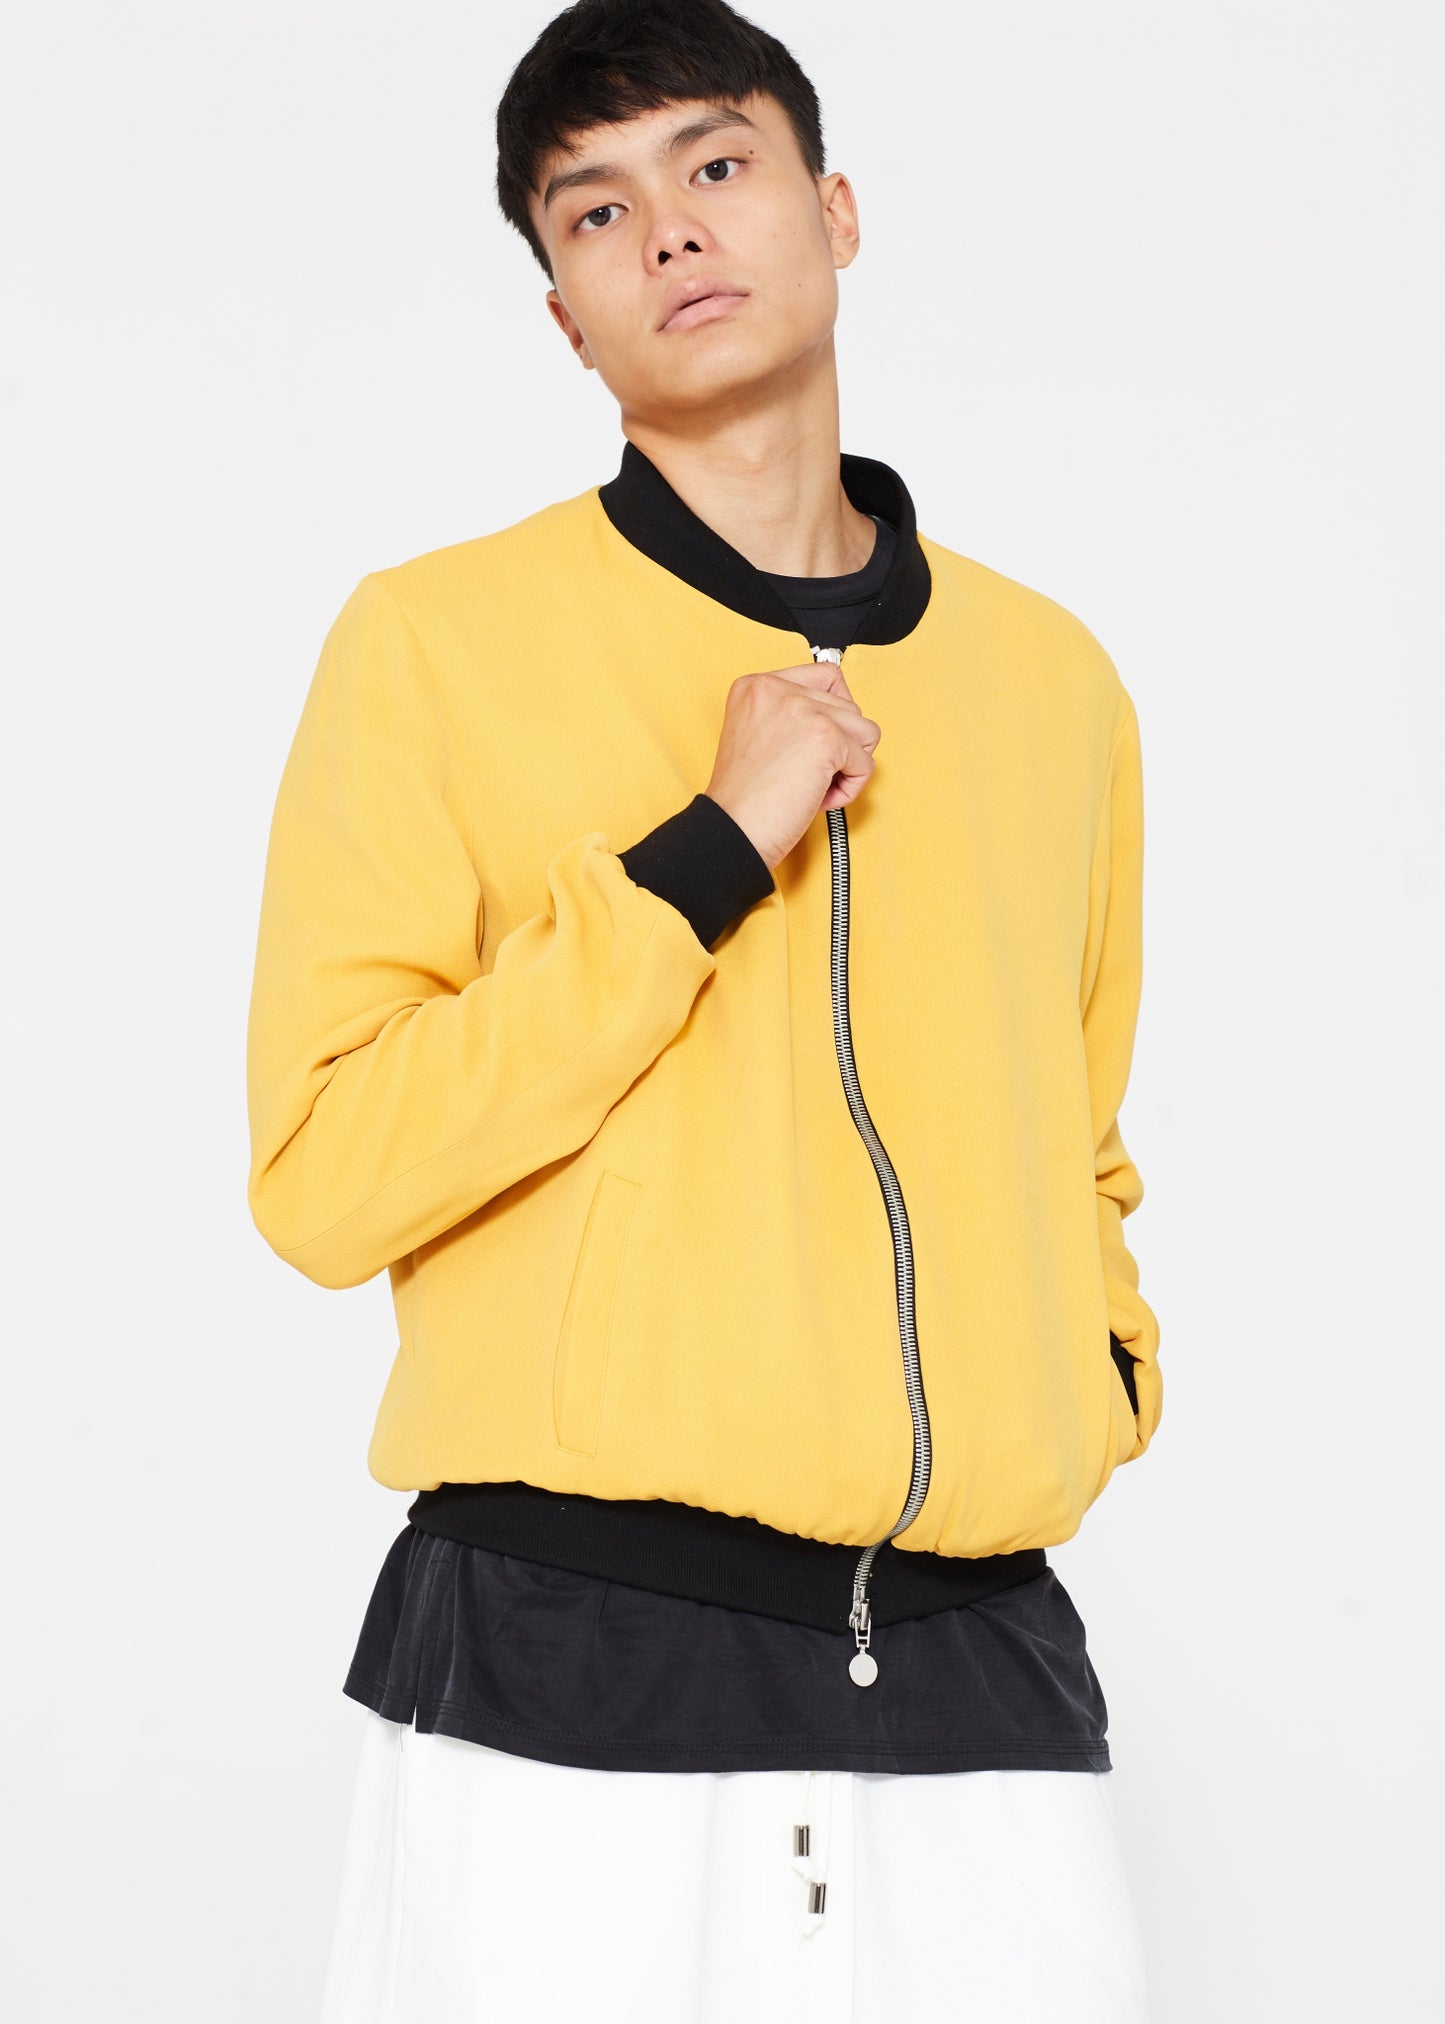 "The Limited Edition Crepe Bomber" in Sunset Yellow